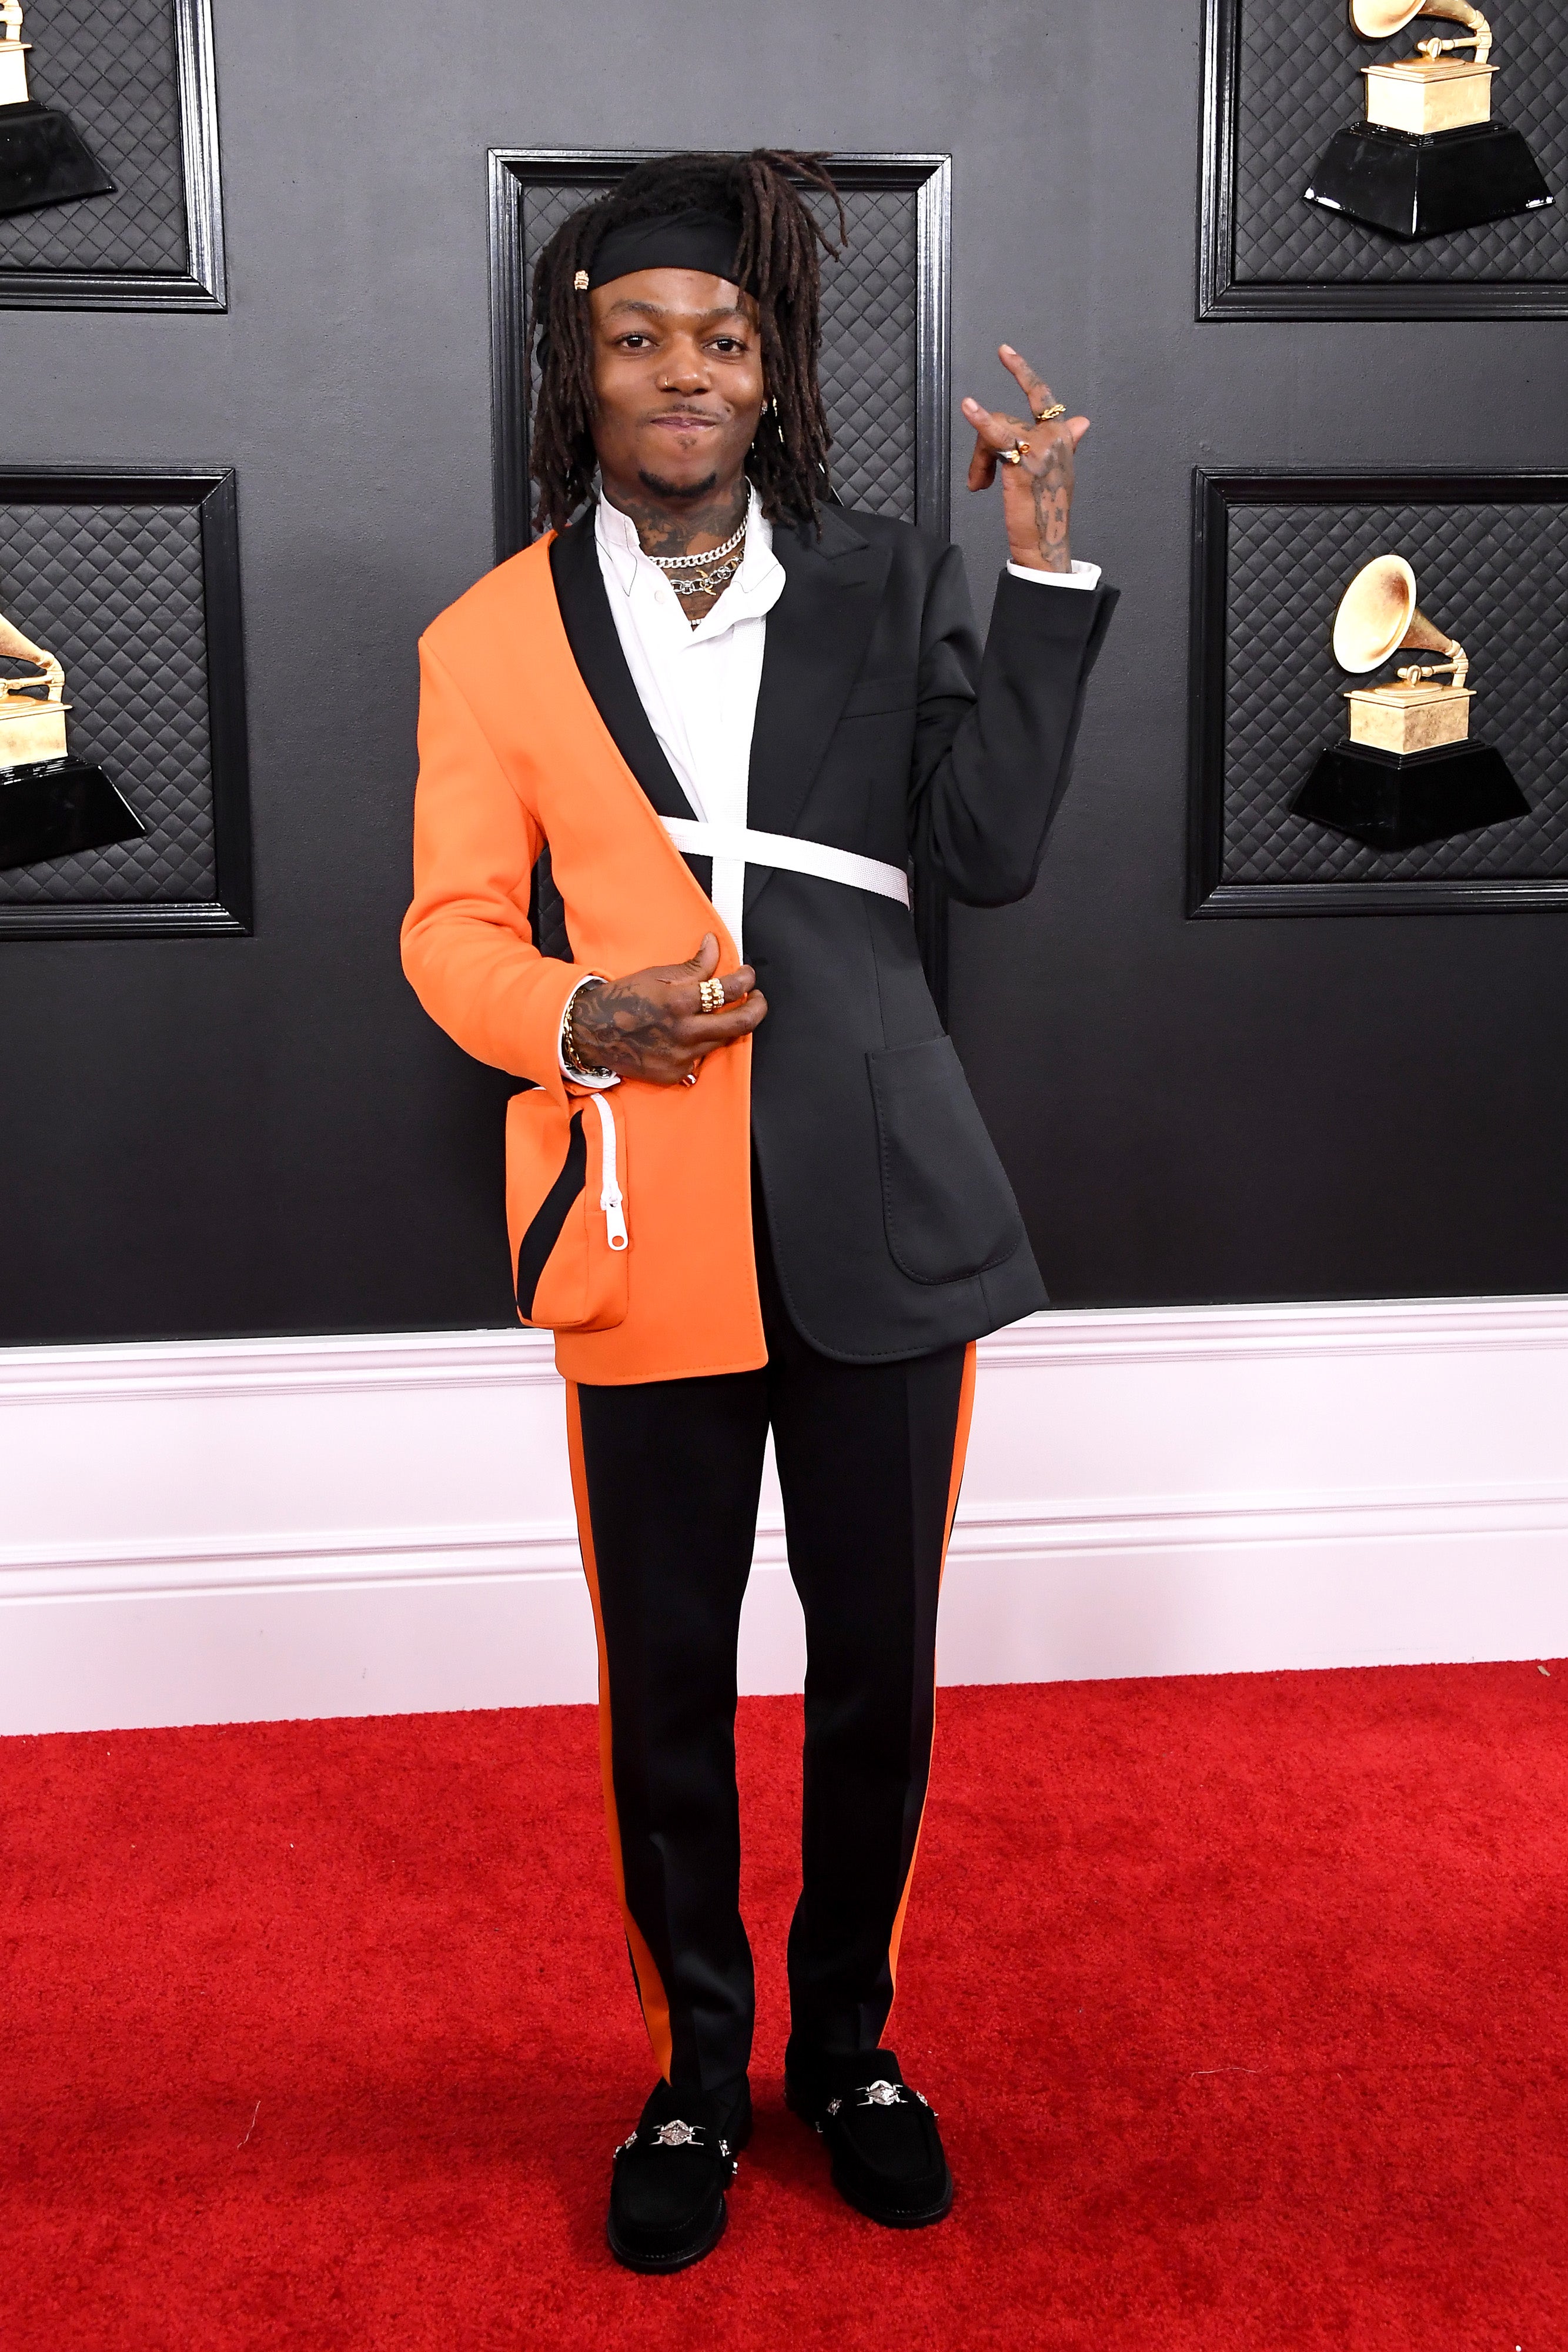 The Best Dressed Men At The 62nd Annual Grammy Awards